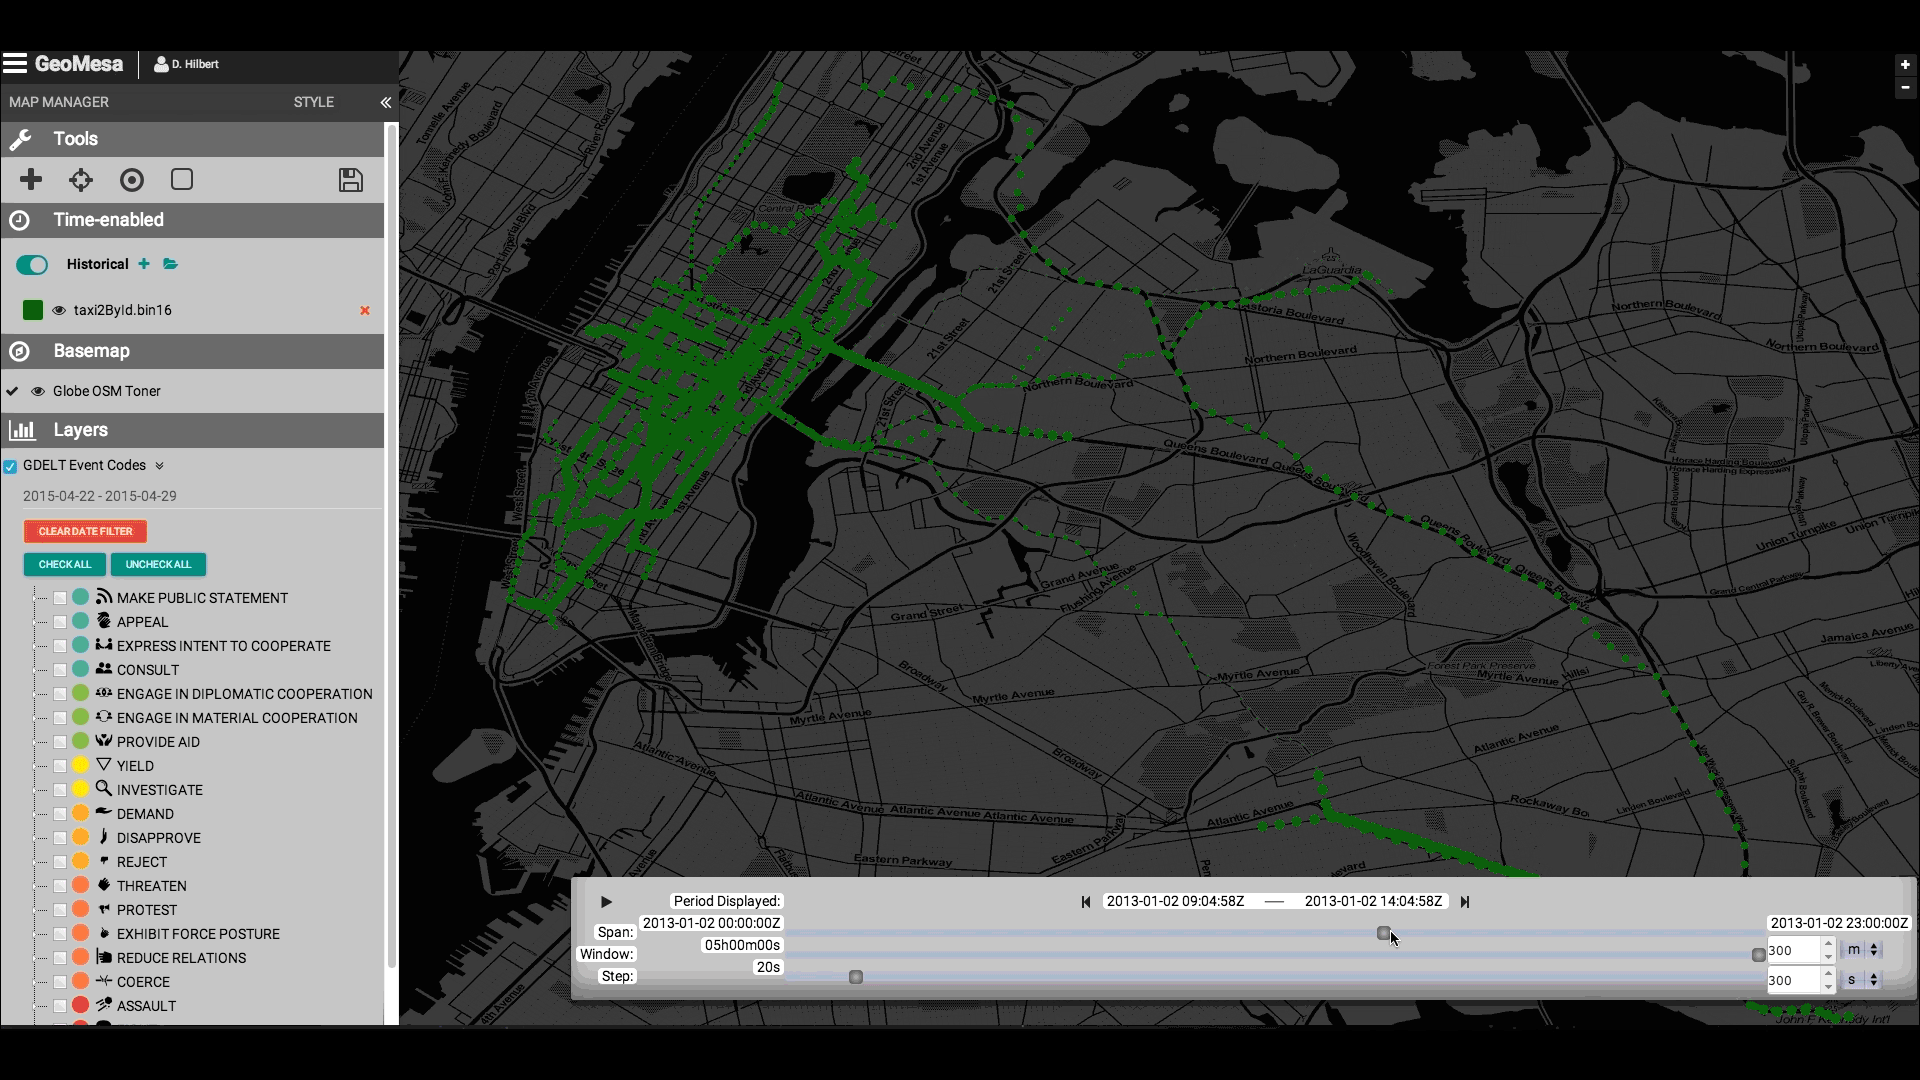 NYC taxi tracks stored in GeoMesa